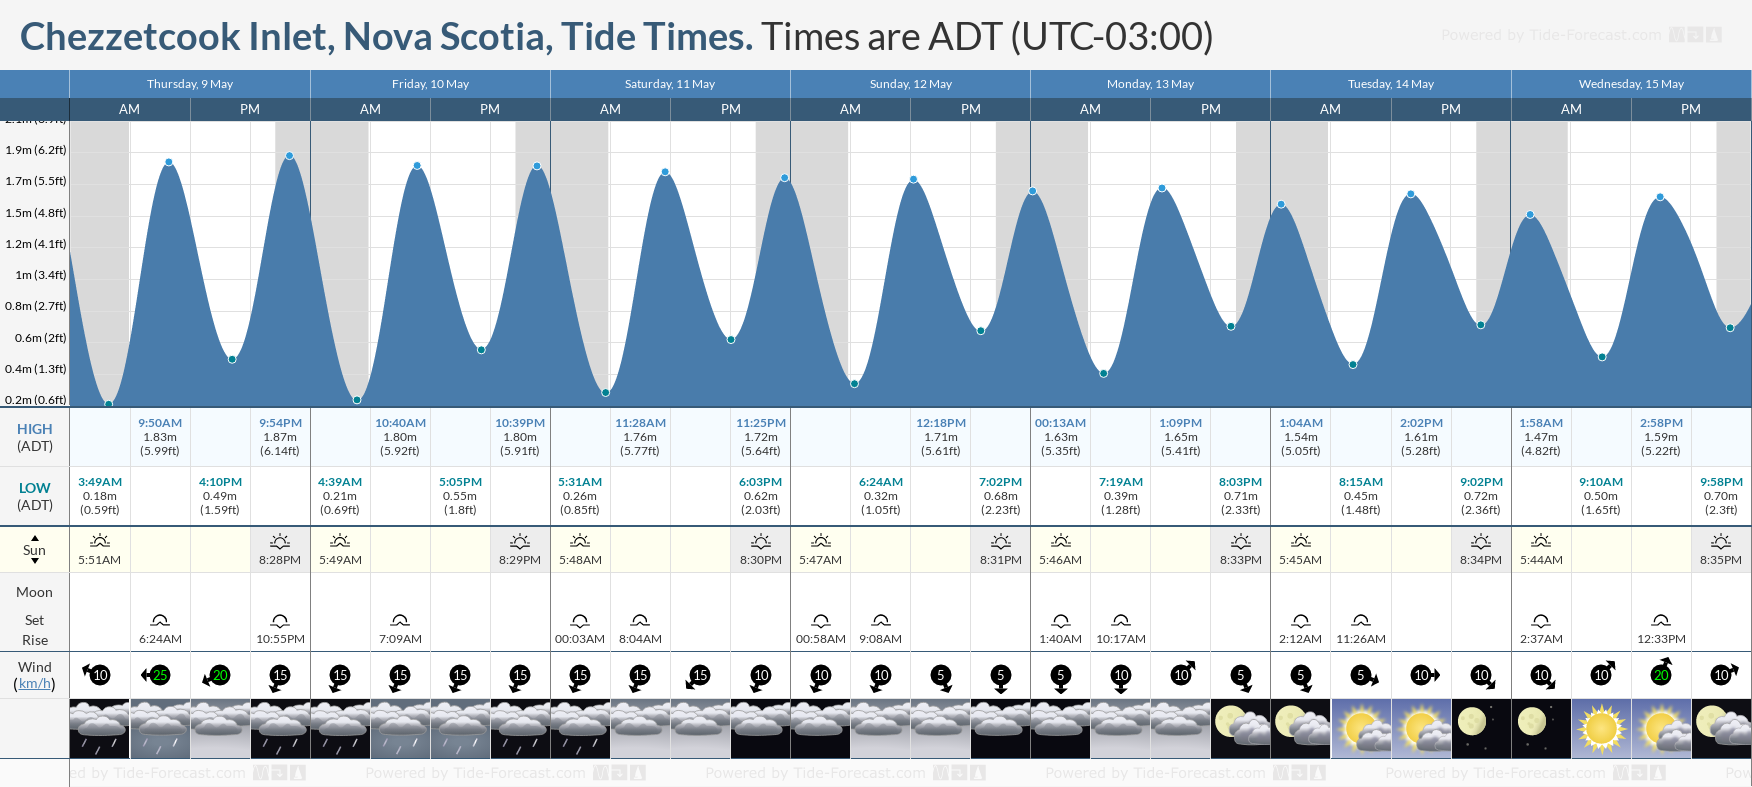 Chezzetcook Inlet, Nova Scotia Tide Chart including high and low tide tide times for the next 7 days